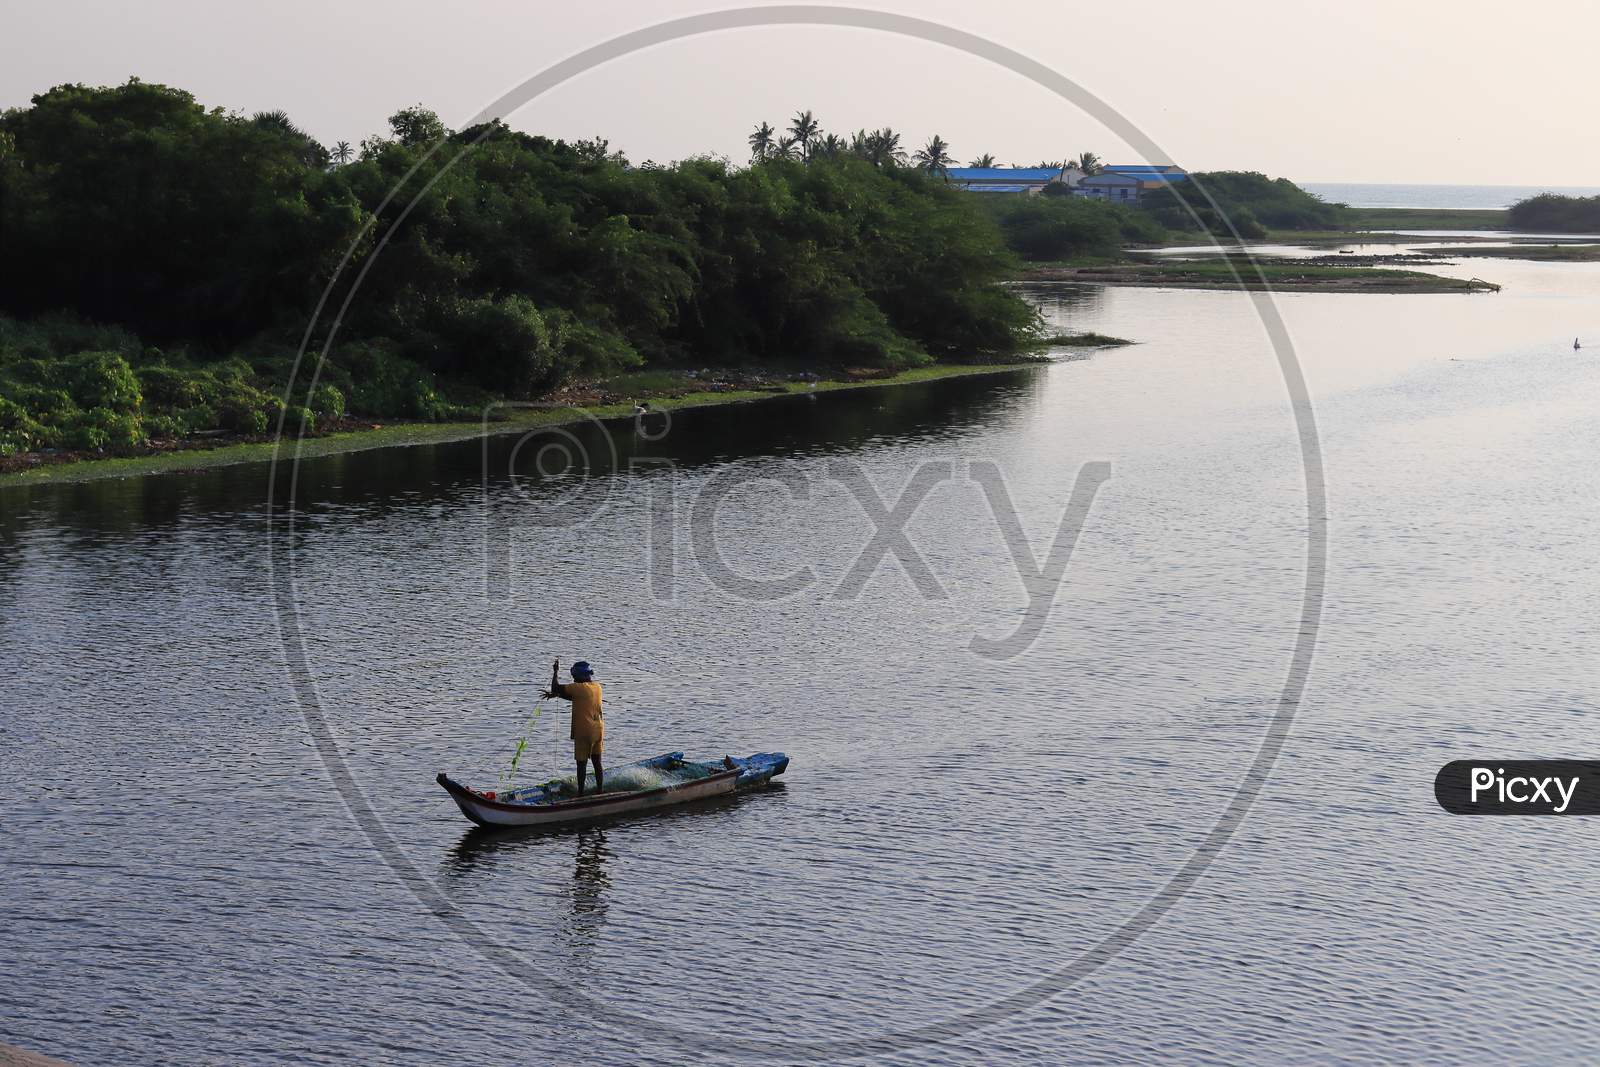 In The Morning, A Fisherman Rode In A Wooden Boat To Catch Fish From The Lake Of Water.